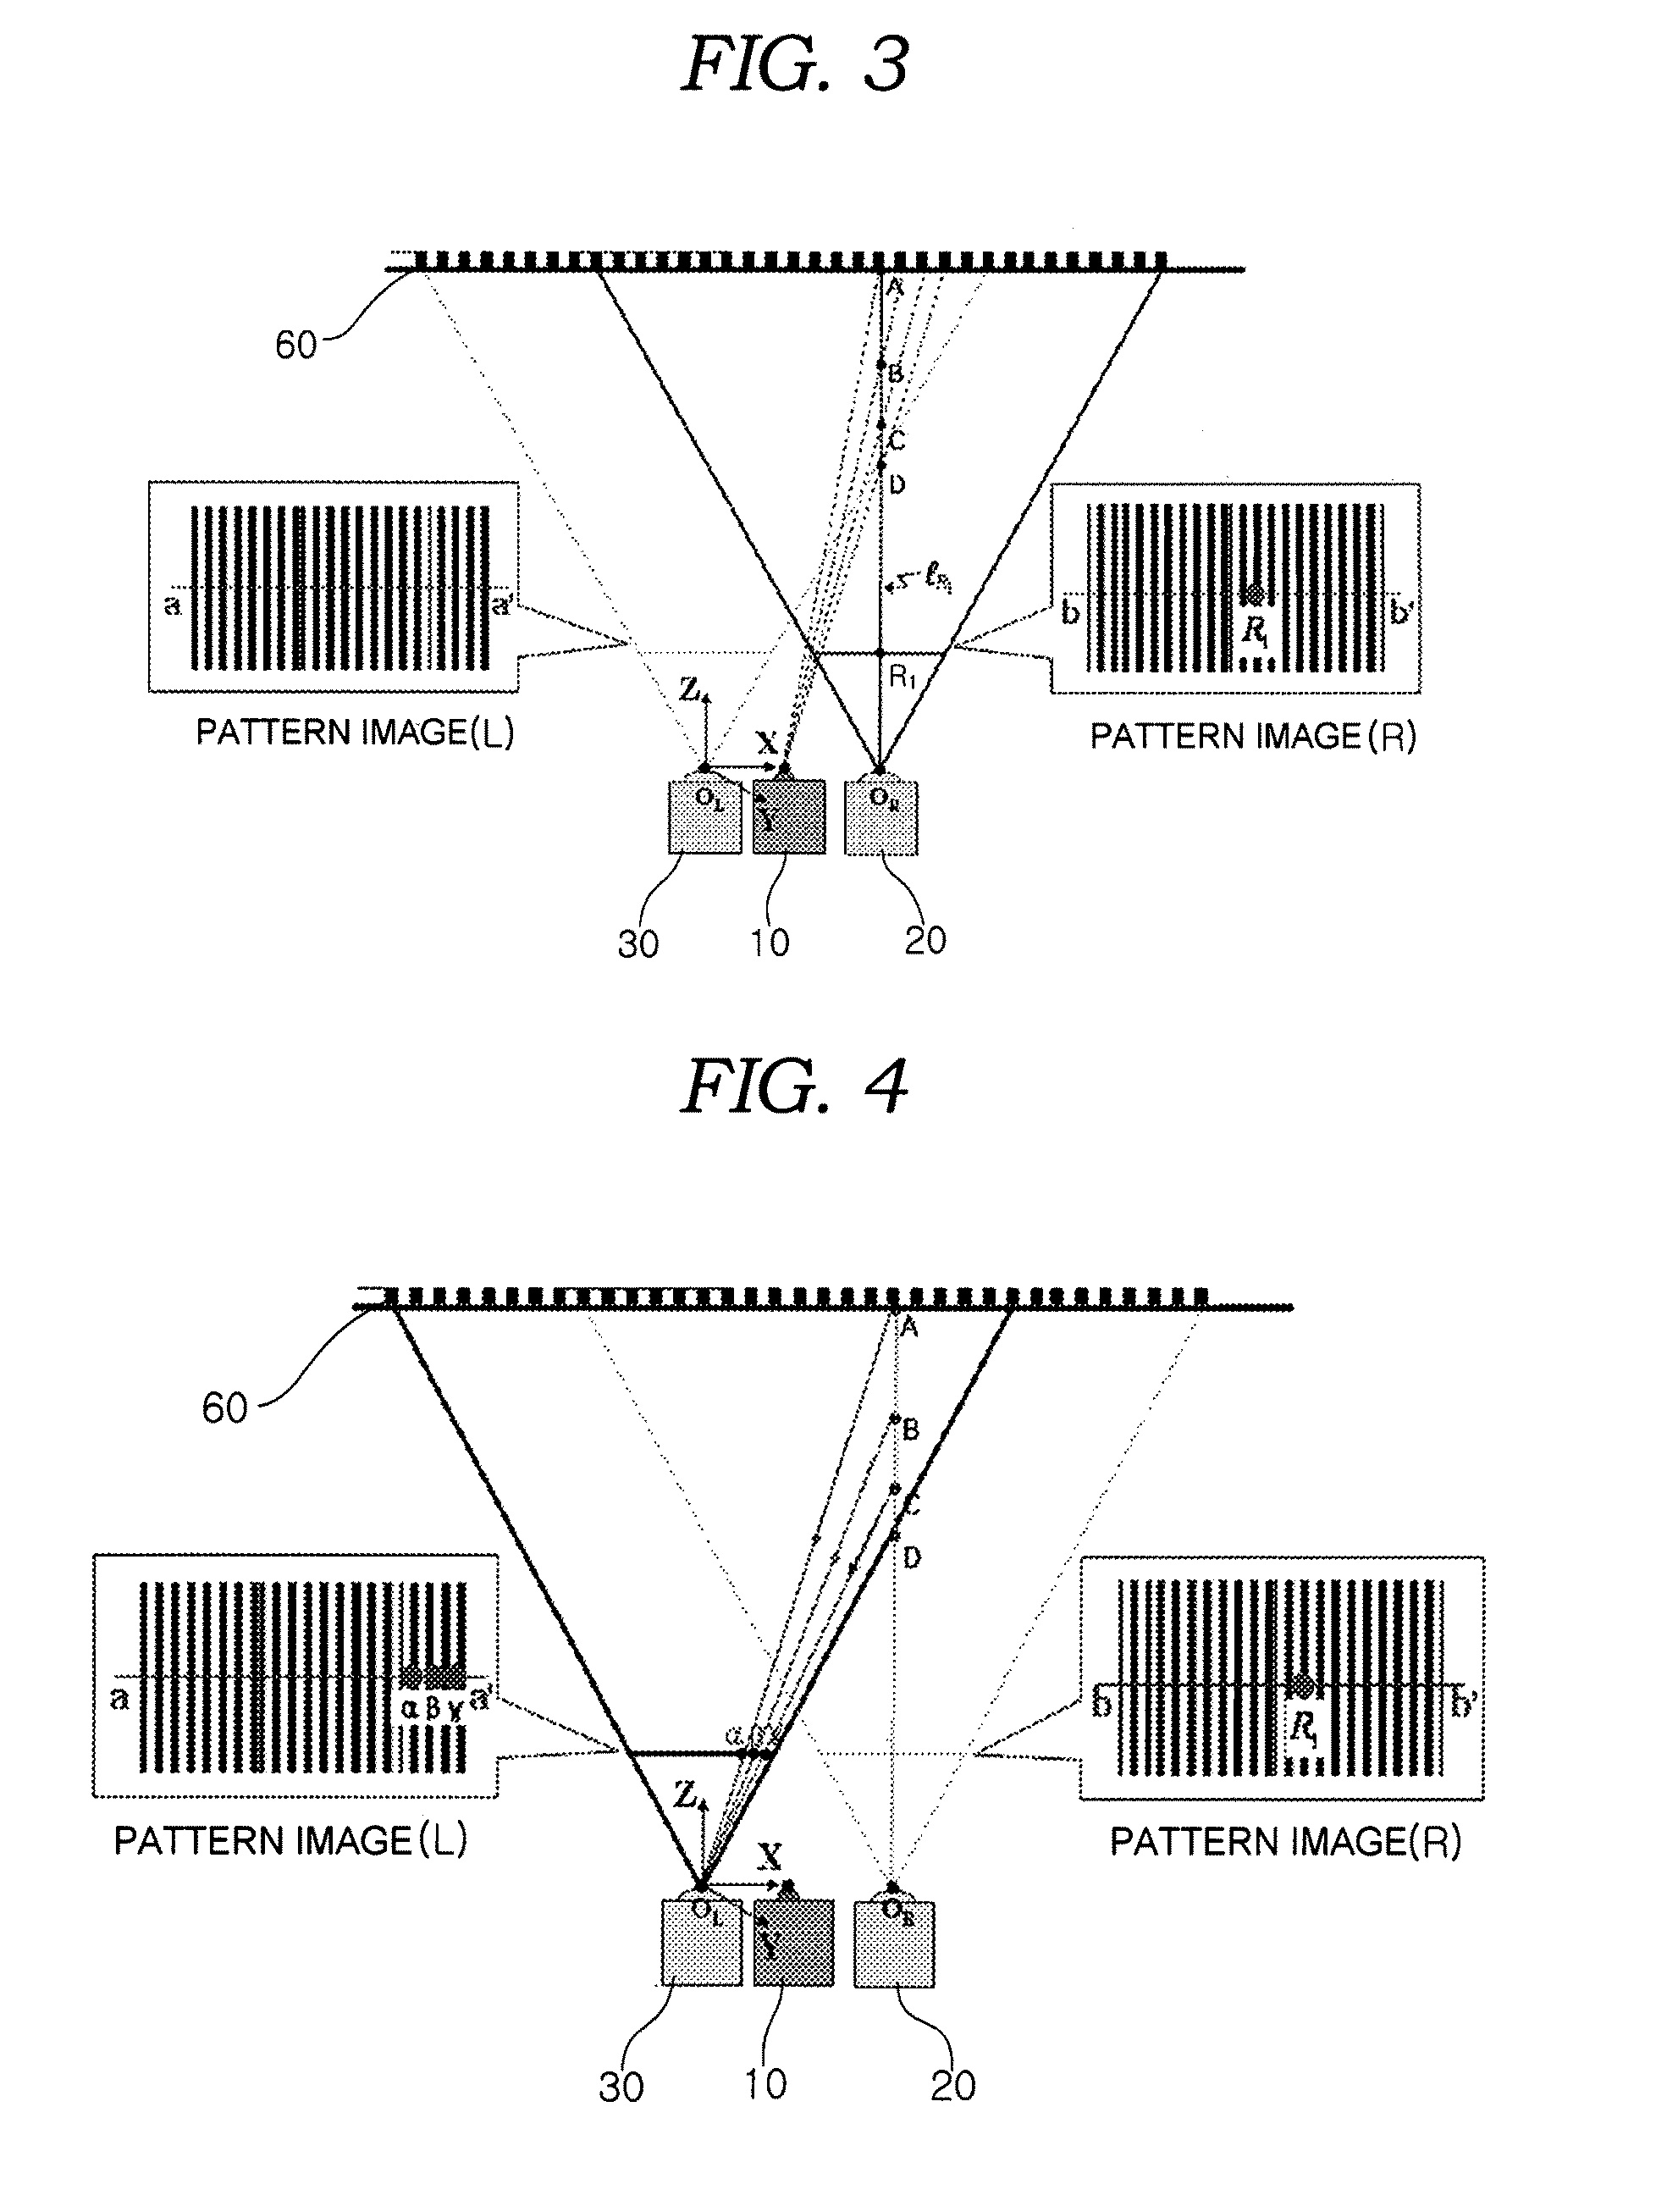 Three-dimensional shape measurement apparatus and method for eliminating 2pi ambiguity of moire principle and omitting phase shifting means